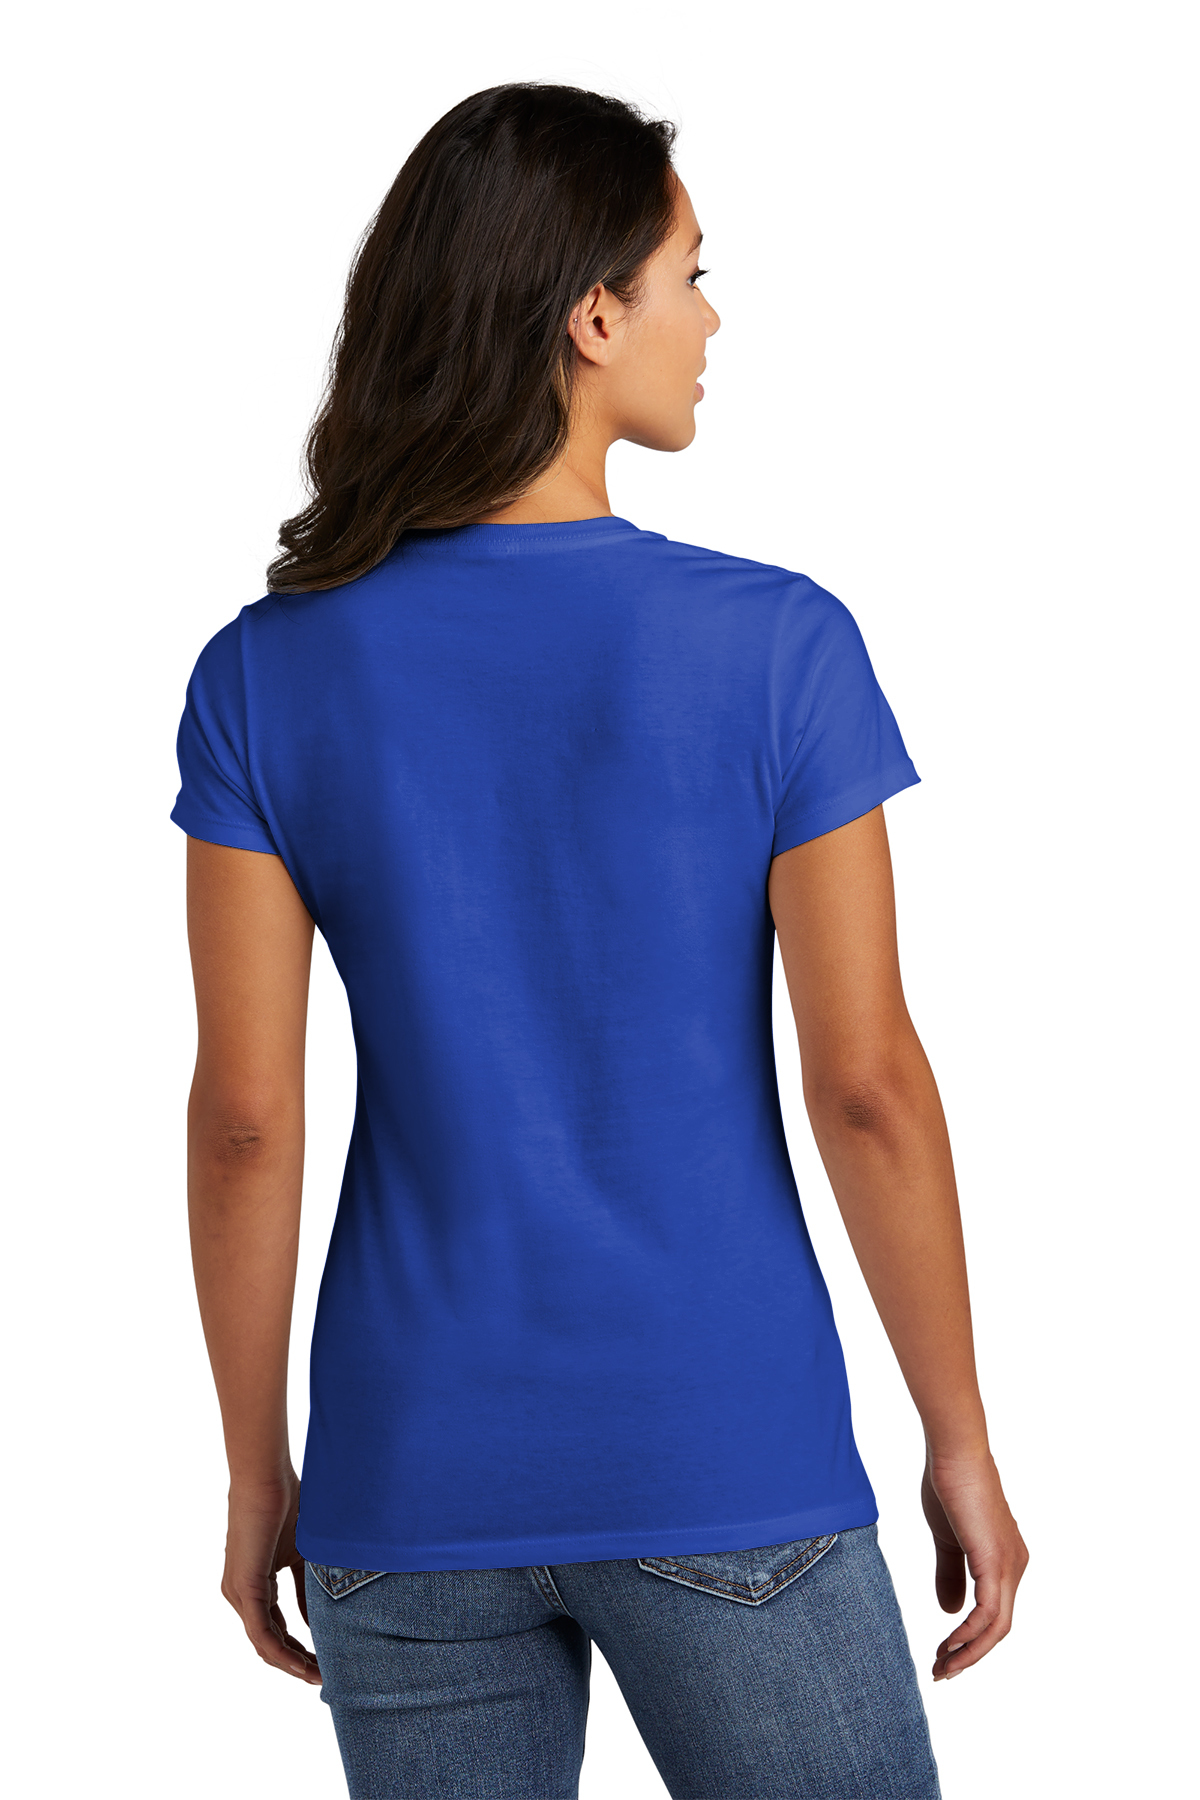 Port & Company ® Ladies Fan Favorite™ Tee | Product | Company Casuals